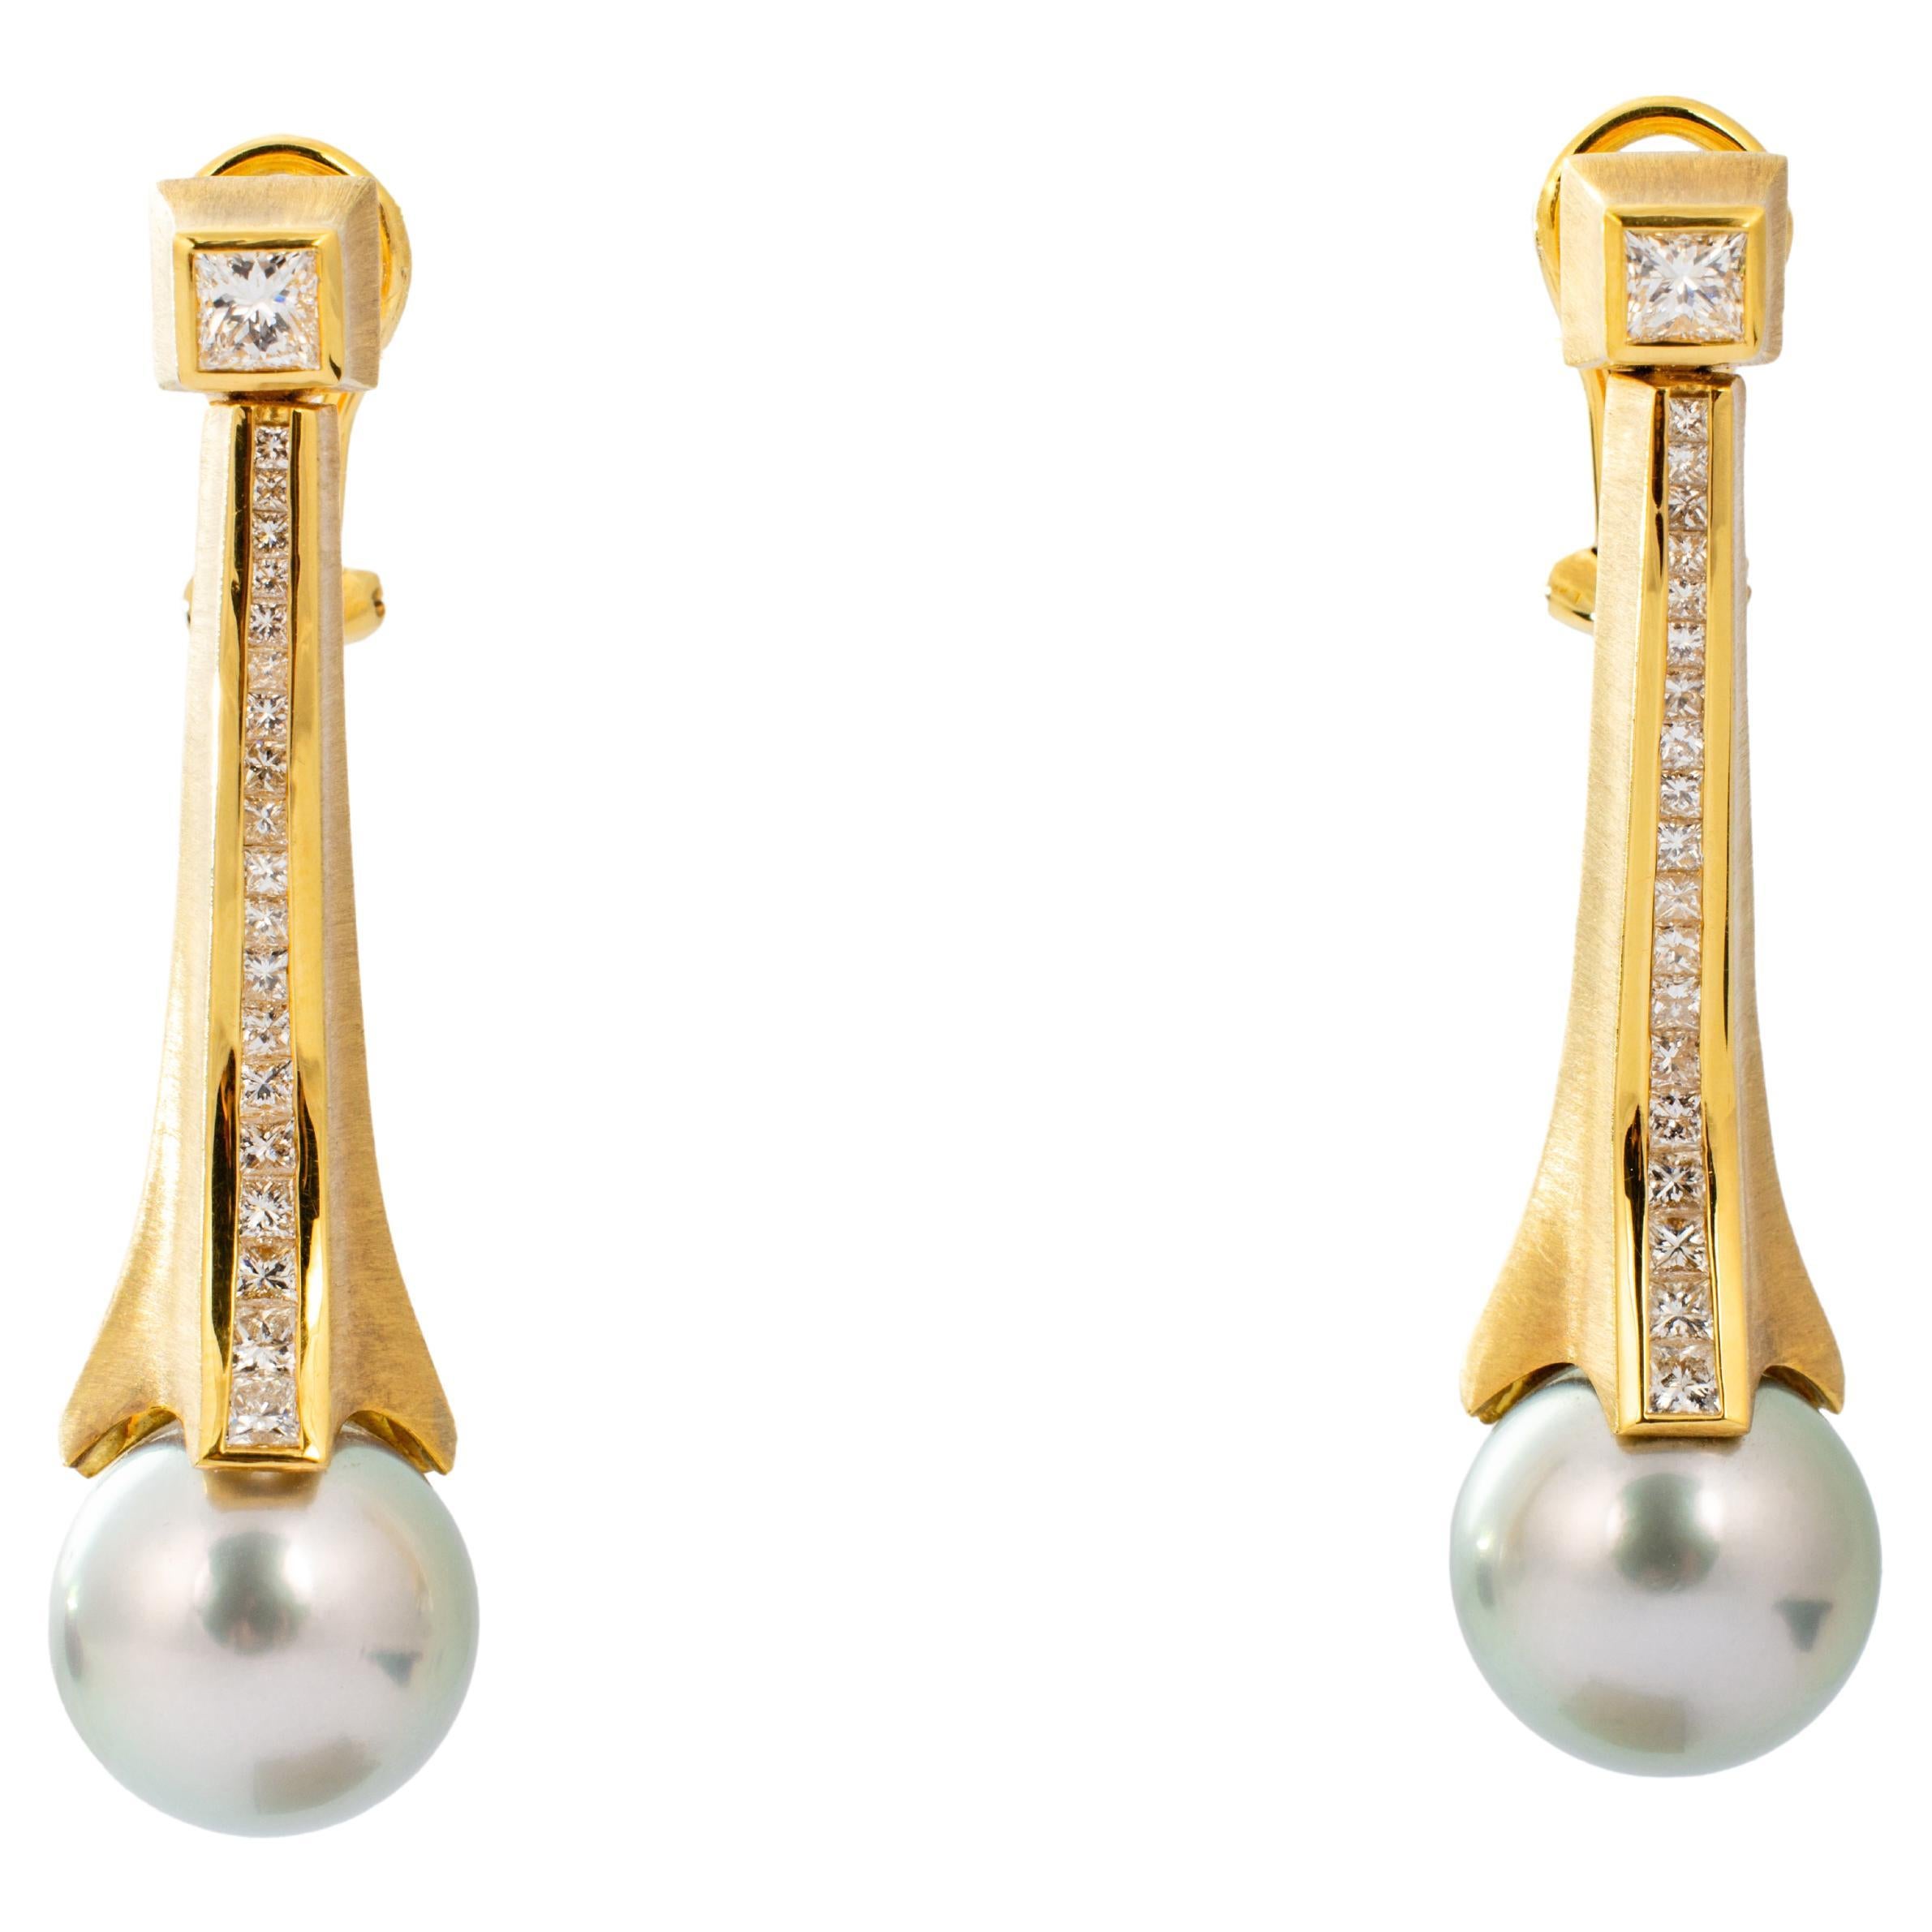 "Costis" Eiffel Earrings, 12.50mm Gray South Sea Pearls, and 1.73 cts Diamonds For Sale